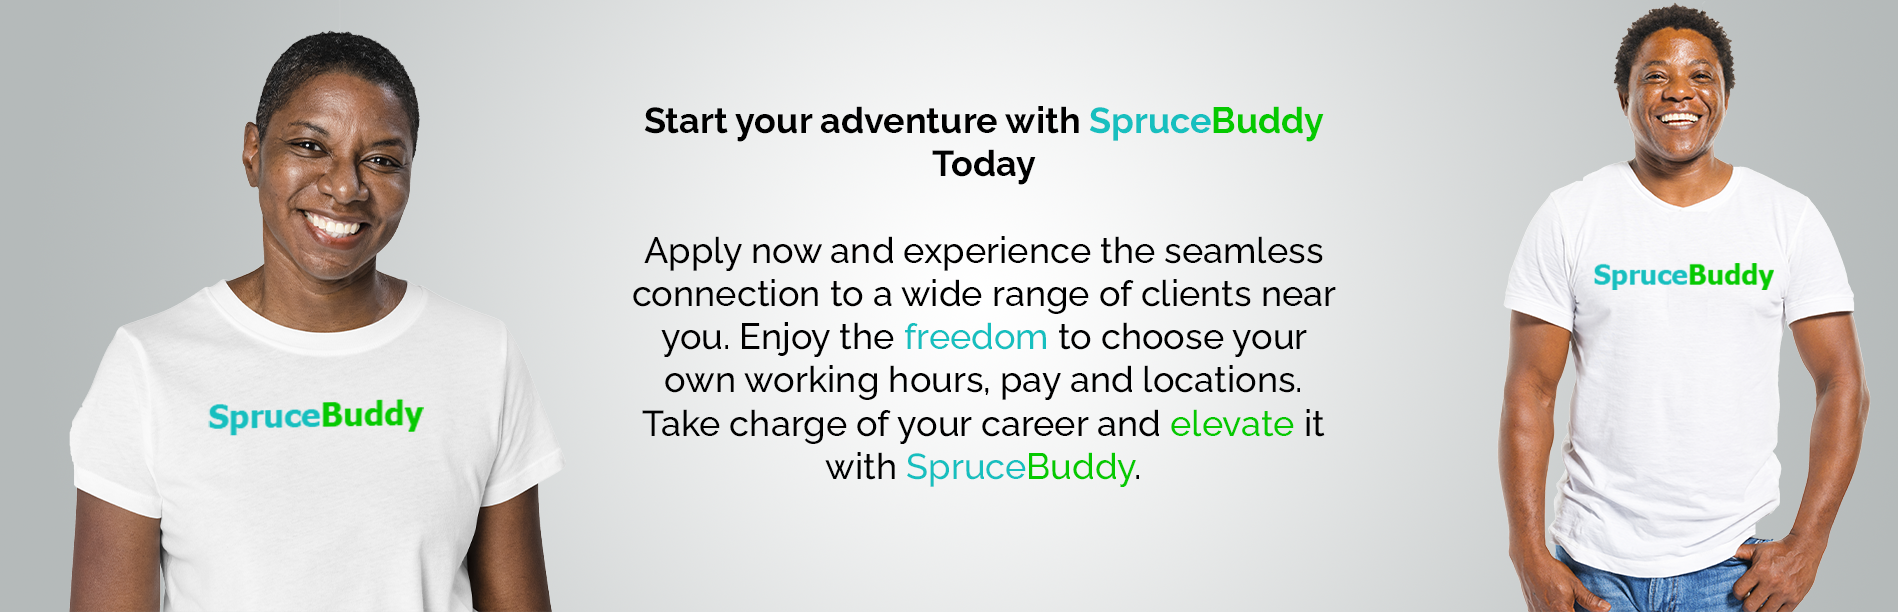 How to sign up to SpruceBuddy